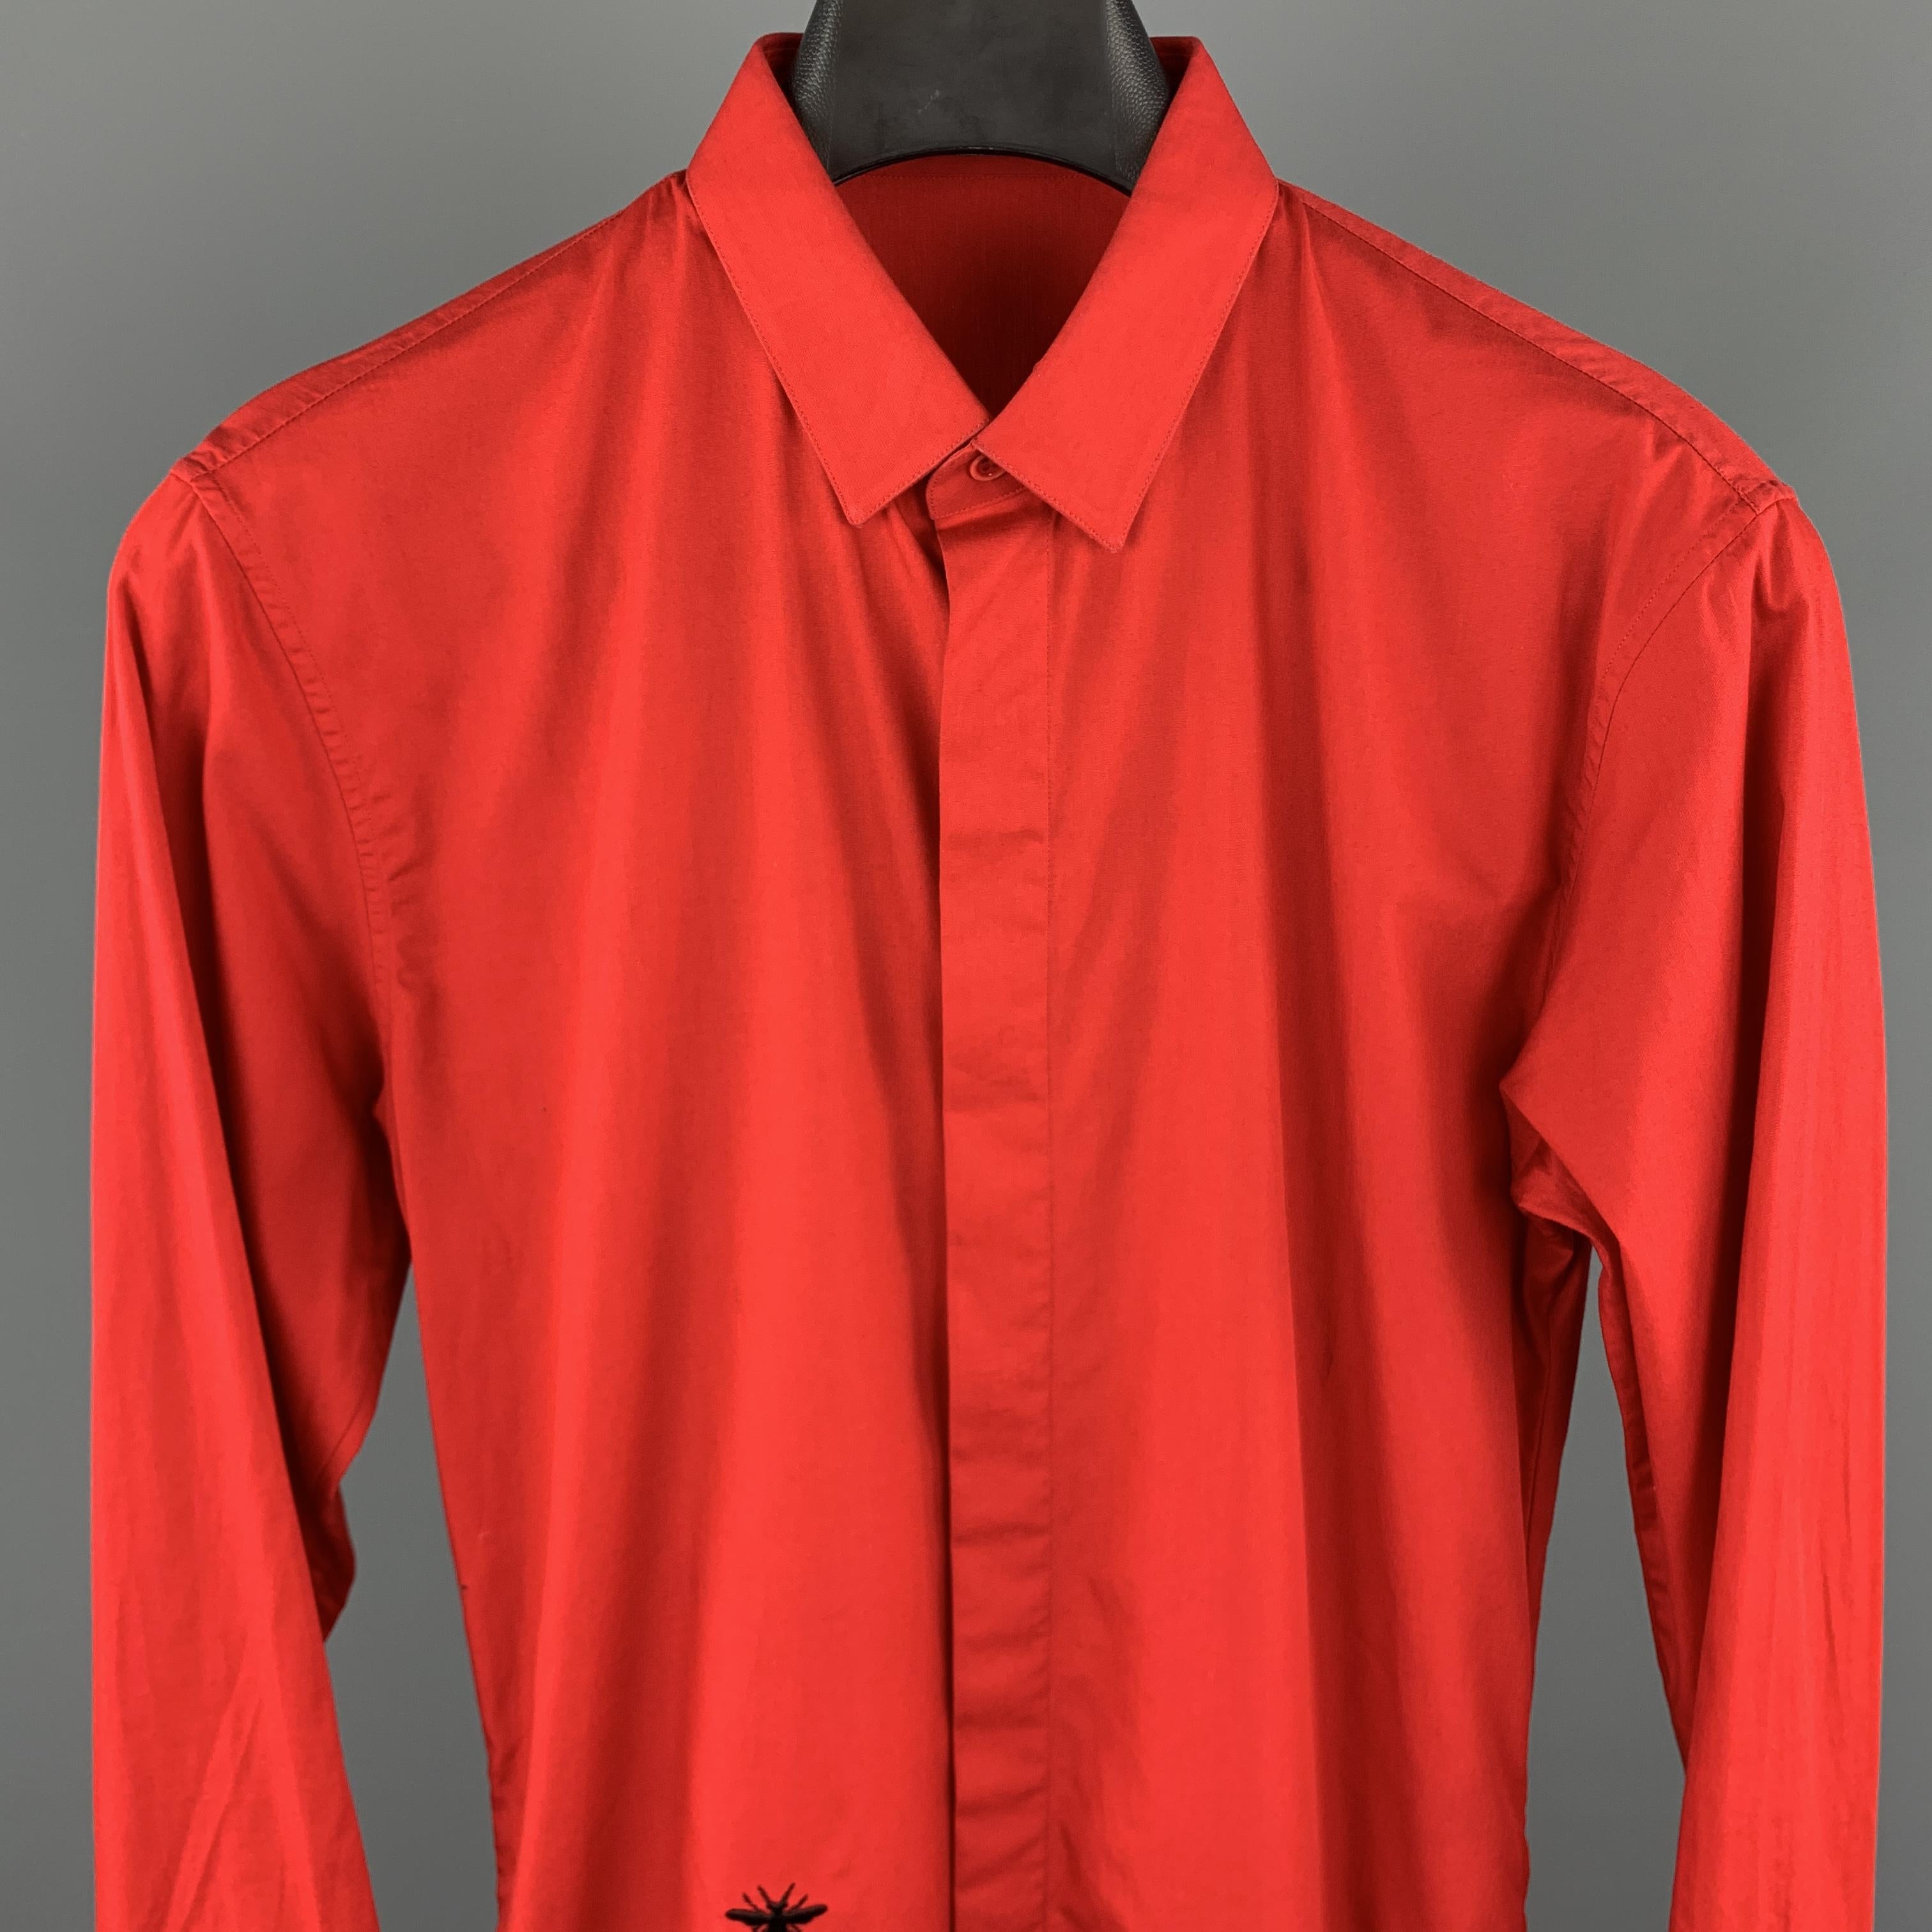 DIOR HOMME Long Sleeve Shirt comes in a red tone in a solid cotton material, with a narrow collar, hidden buttons at closure, a bee embroidered at front, buttoned cuffs, button up. Made in Italy.

Excellent Pre-Owned Condition.
Marked: No size 